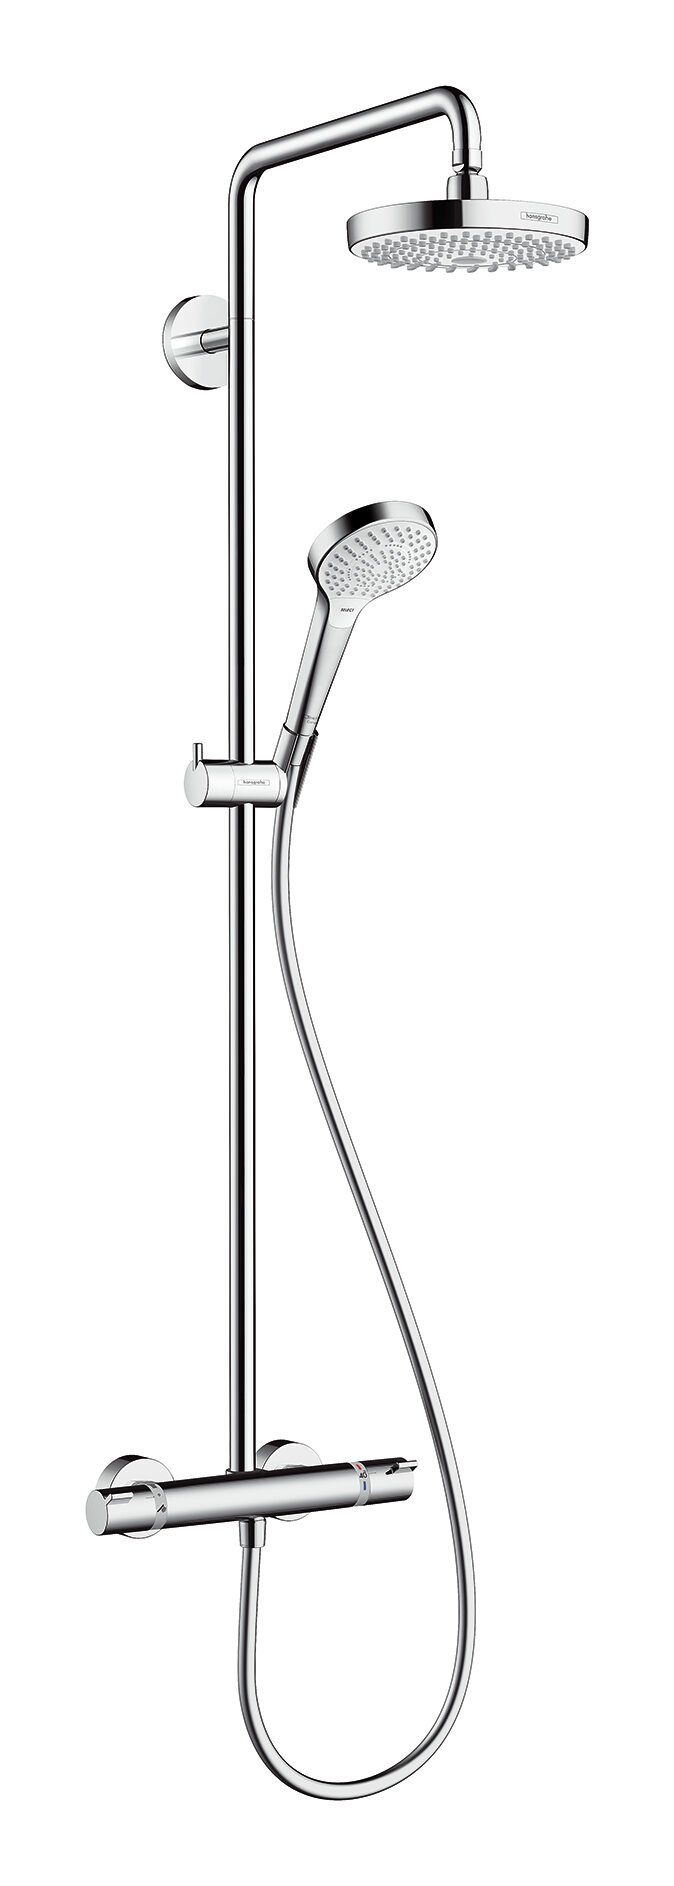 hansgrohe Duschsystem Croma Select S cm, / 2jet Strahlart(en), 2 Höhe 180 114.1 Showerpipe, Weiß Chrom Thermostat mit